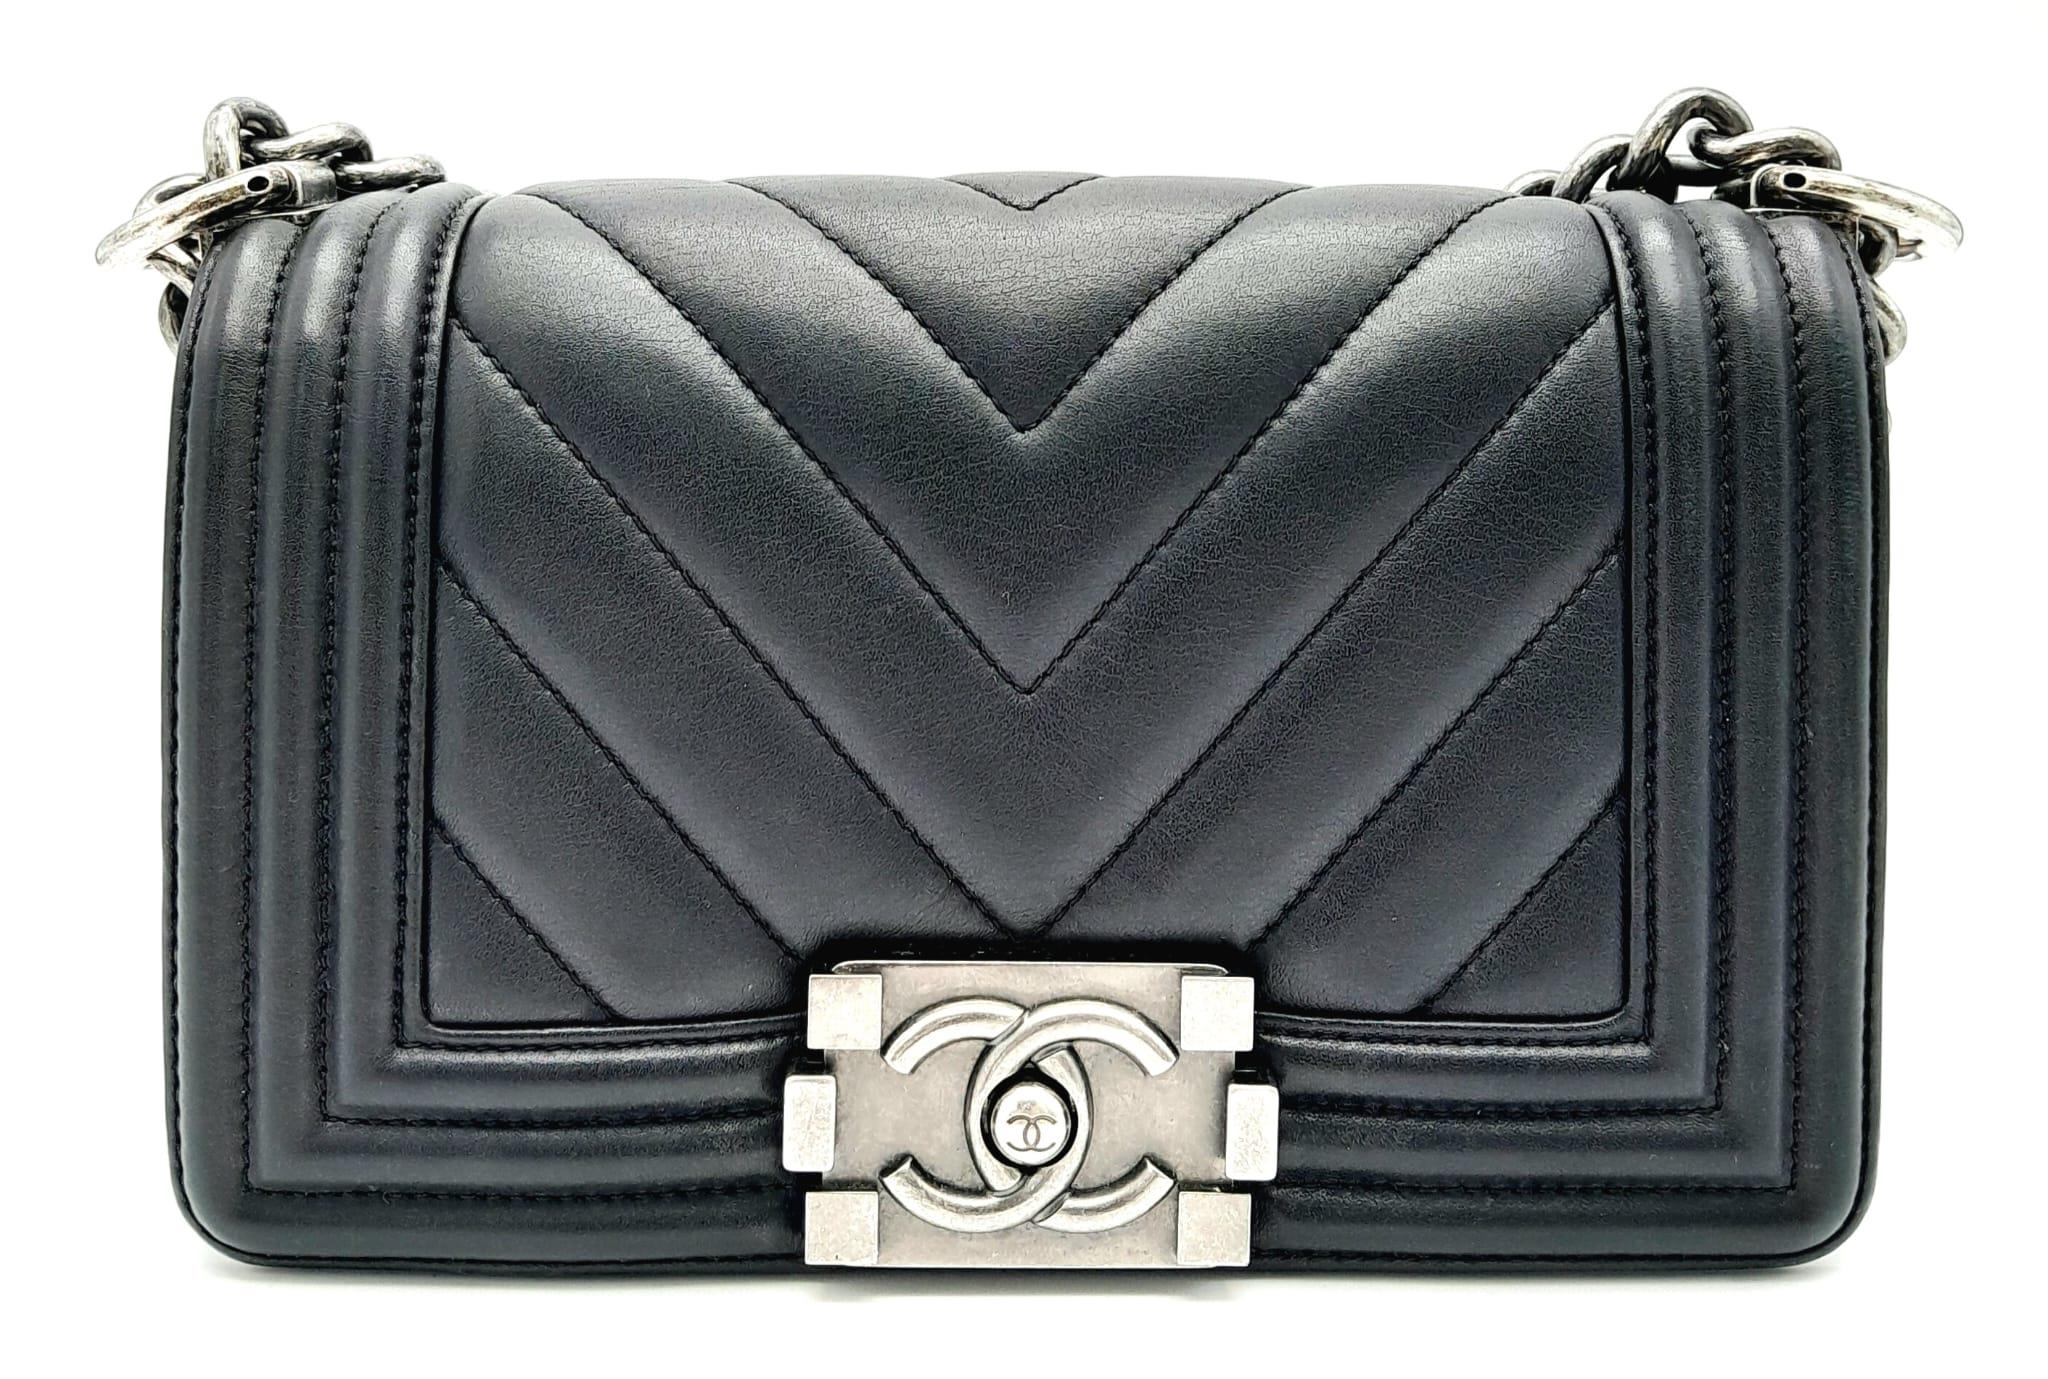 A Chanel Black Leather Boy Bag. Chevron decorative soft black leather with an antique style/finish - Image 2 of 12